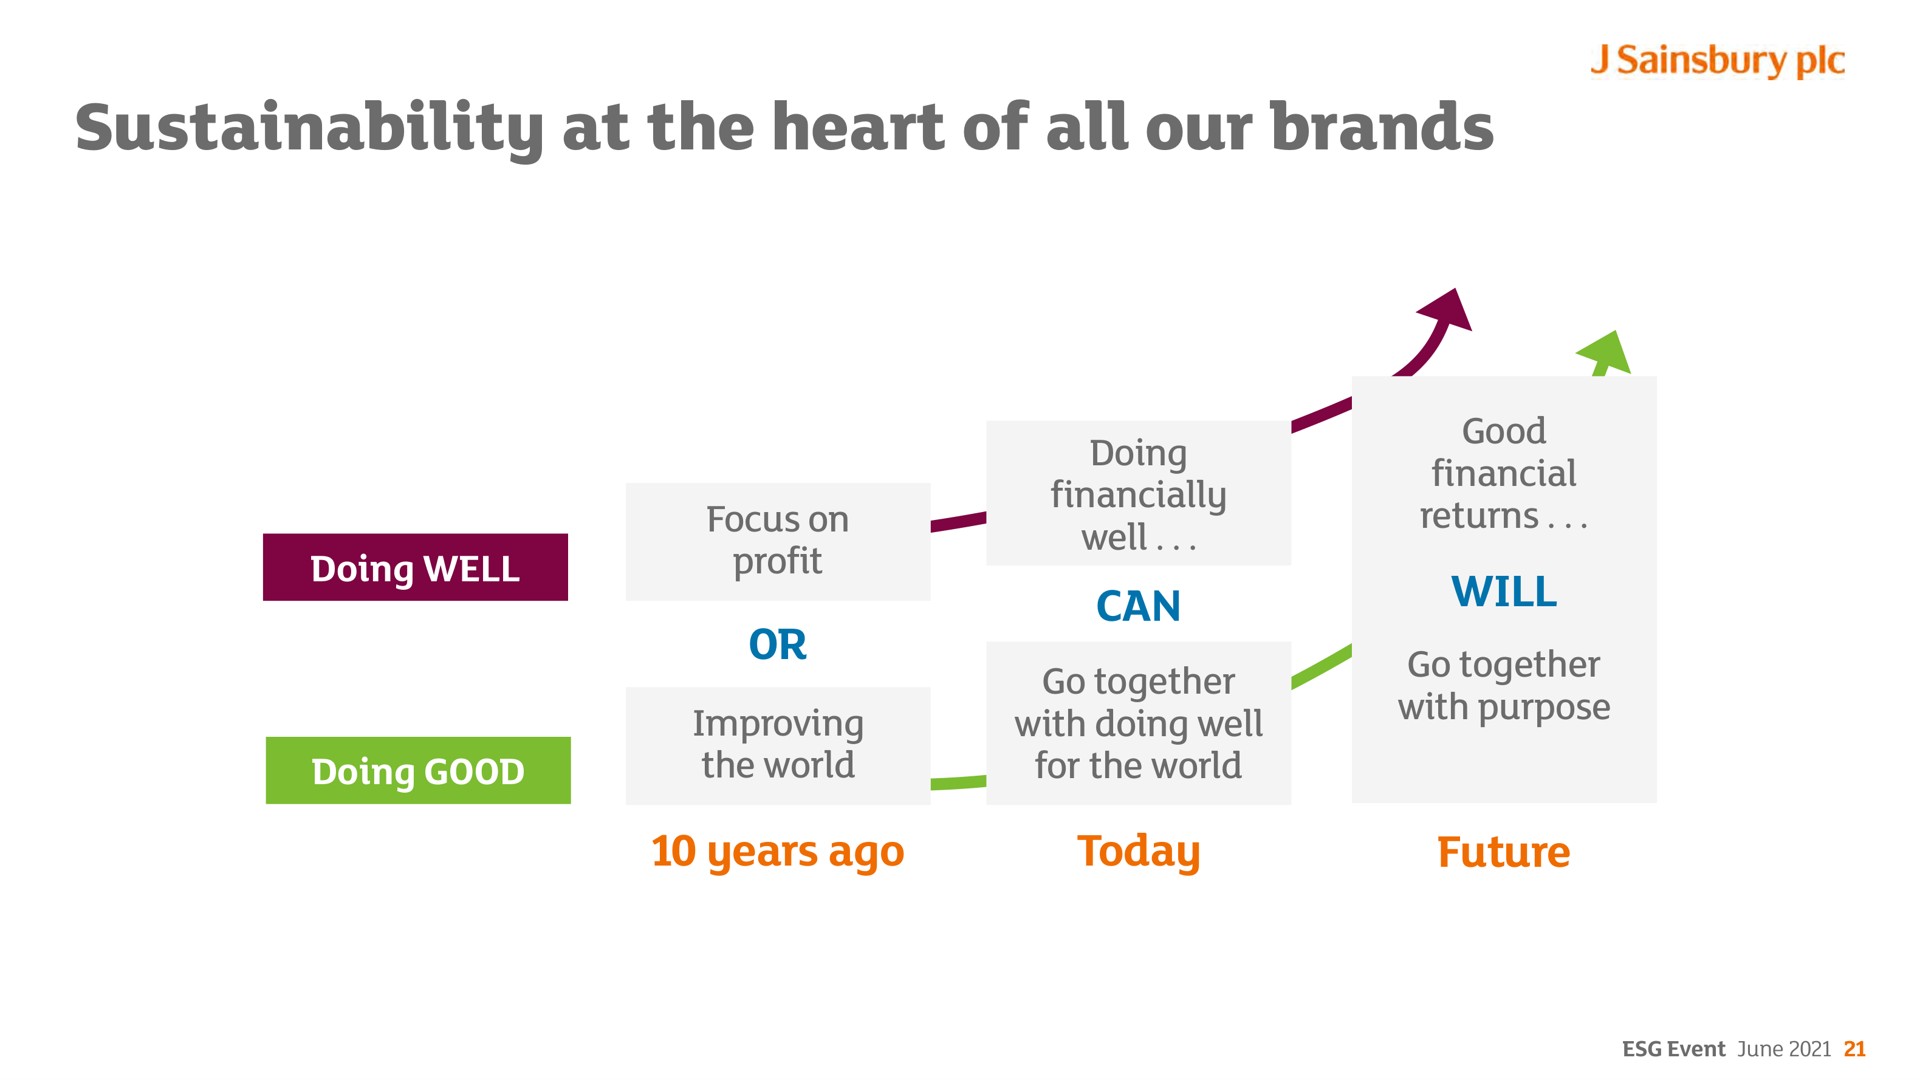 at the heart of all our brands | Sainsbury's